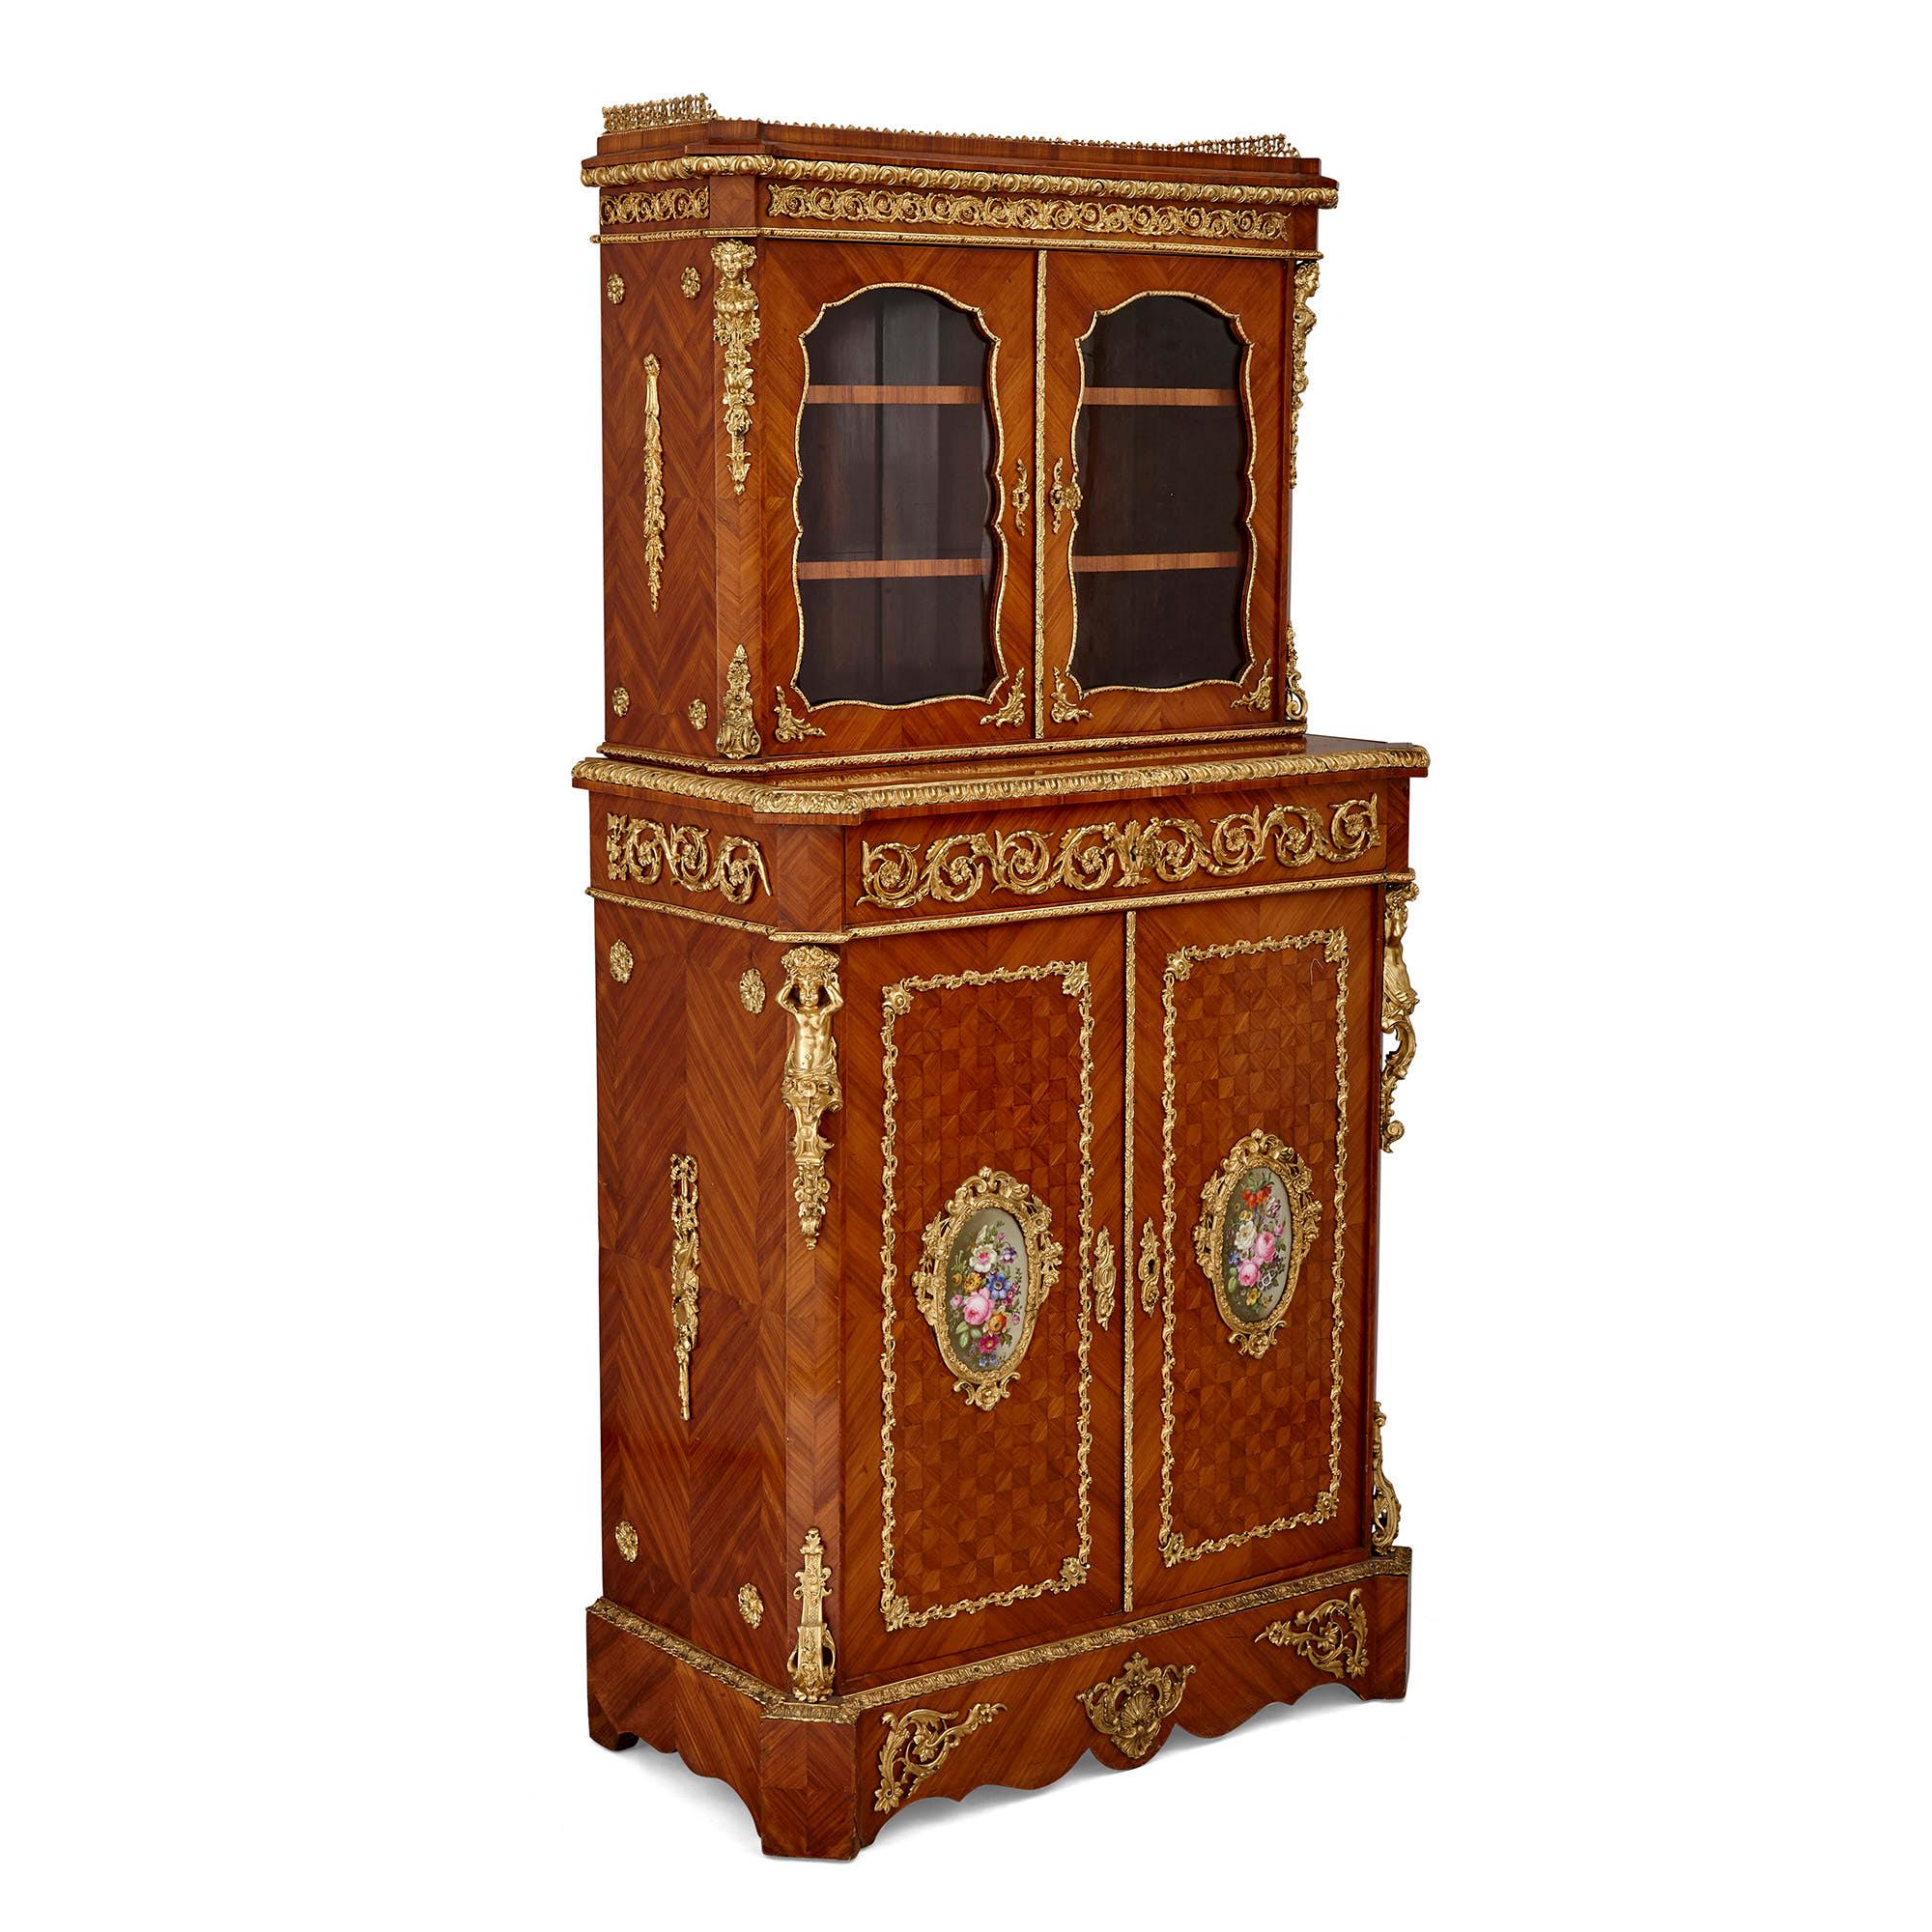 Napoleon III period gilt bronze and porcelain mounted cabinet by Louis Grade
French, circa 1860
Measures: Height 160cm, width 82cm, depth 41cm

This beautiful cabinet is a superb example of the taste that prevailed during the reign of Napoleon